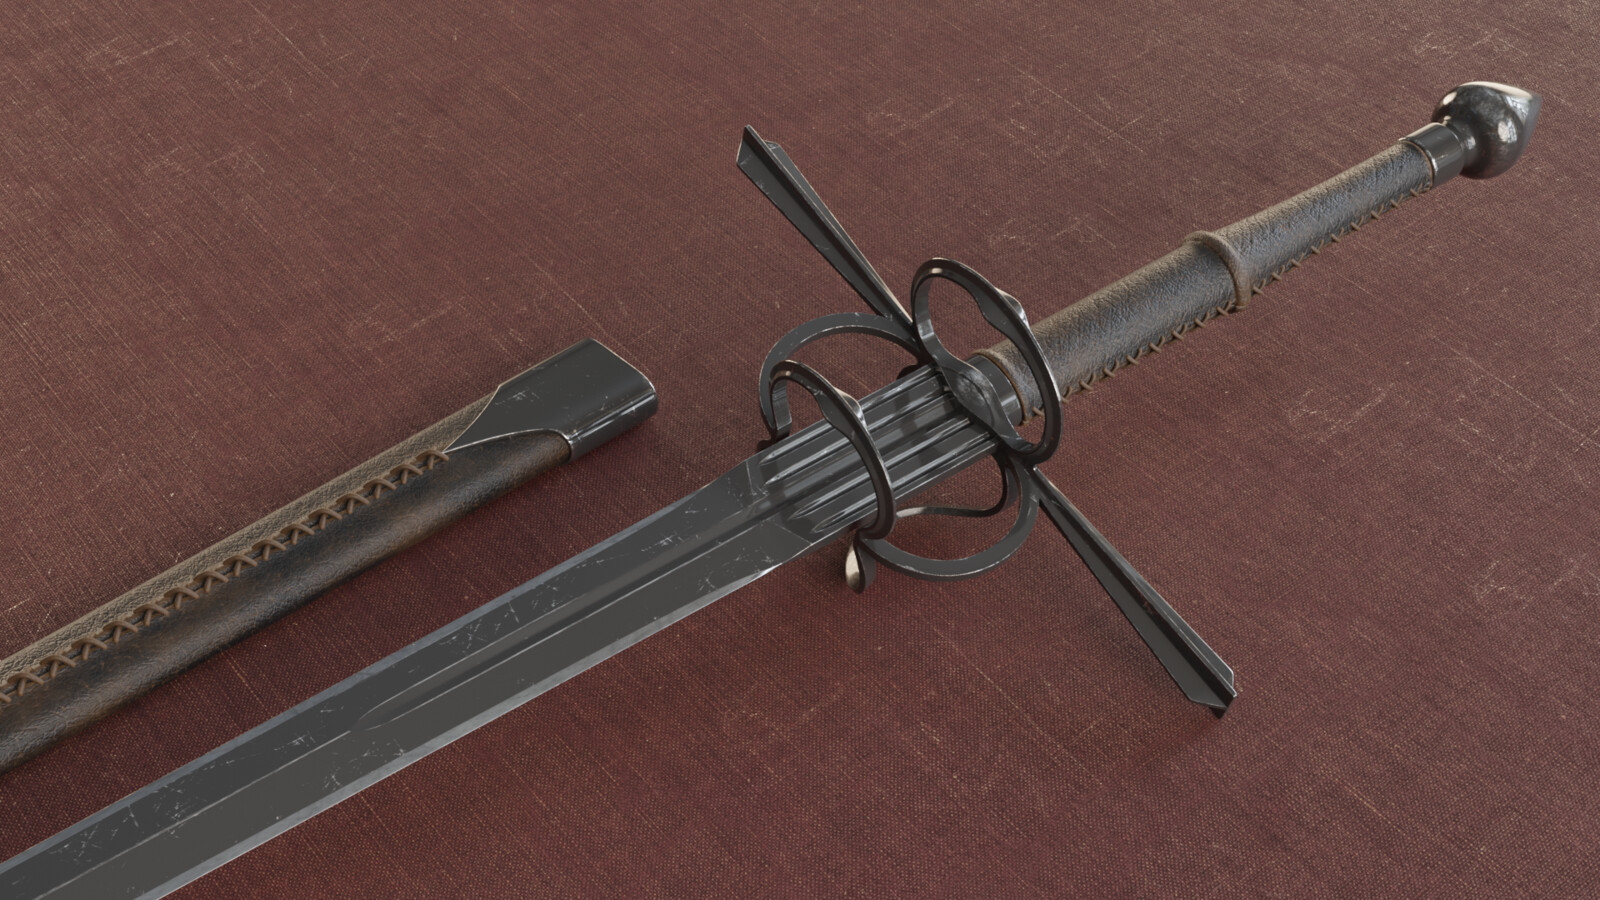 Check out this two handed sword too! https://www.artstation.com/artwork/GavPZB